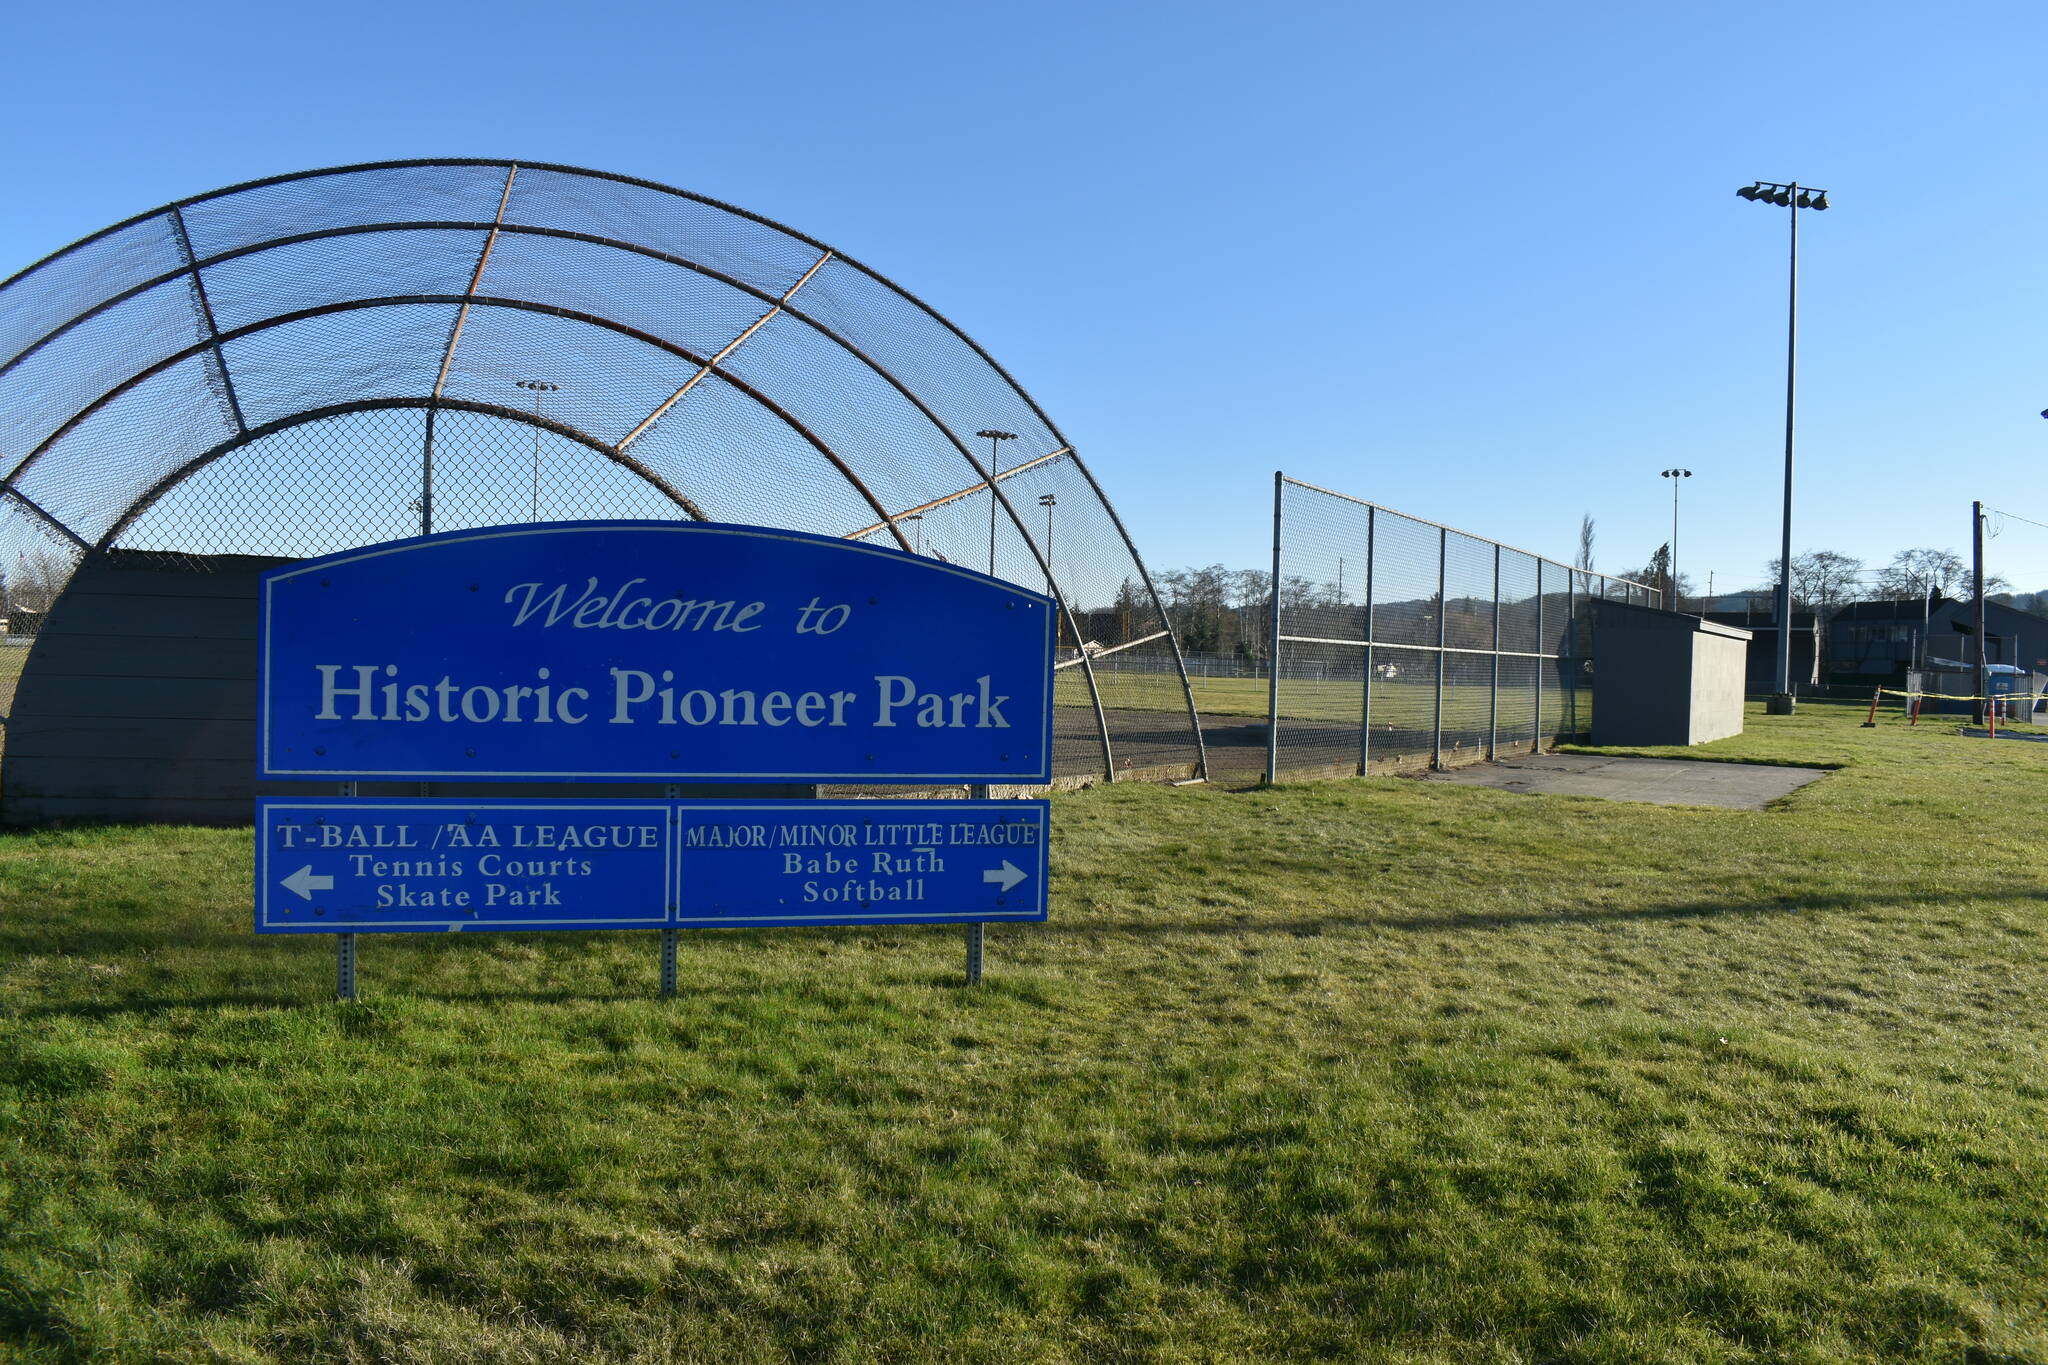 Matthew N. Wells | The Daily World 
Failor Field, located on the South Lawrence Street side of Pioneer Park in Aberdeen, will soon get new fencing that will be ready by March 31, 2022. A new public restroom, which should be ready by October 2022, will be placed next to Failor Field.